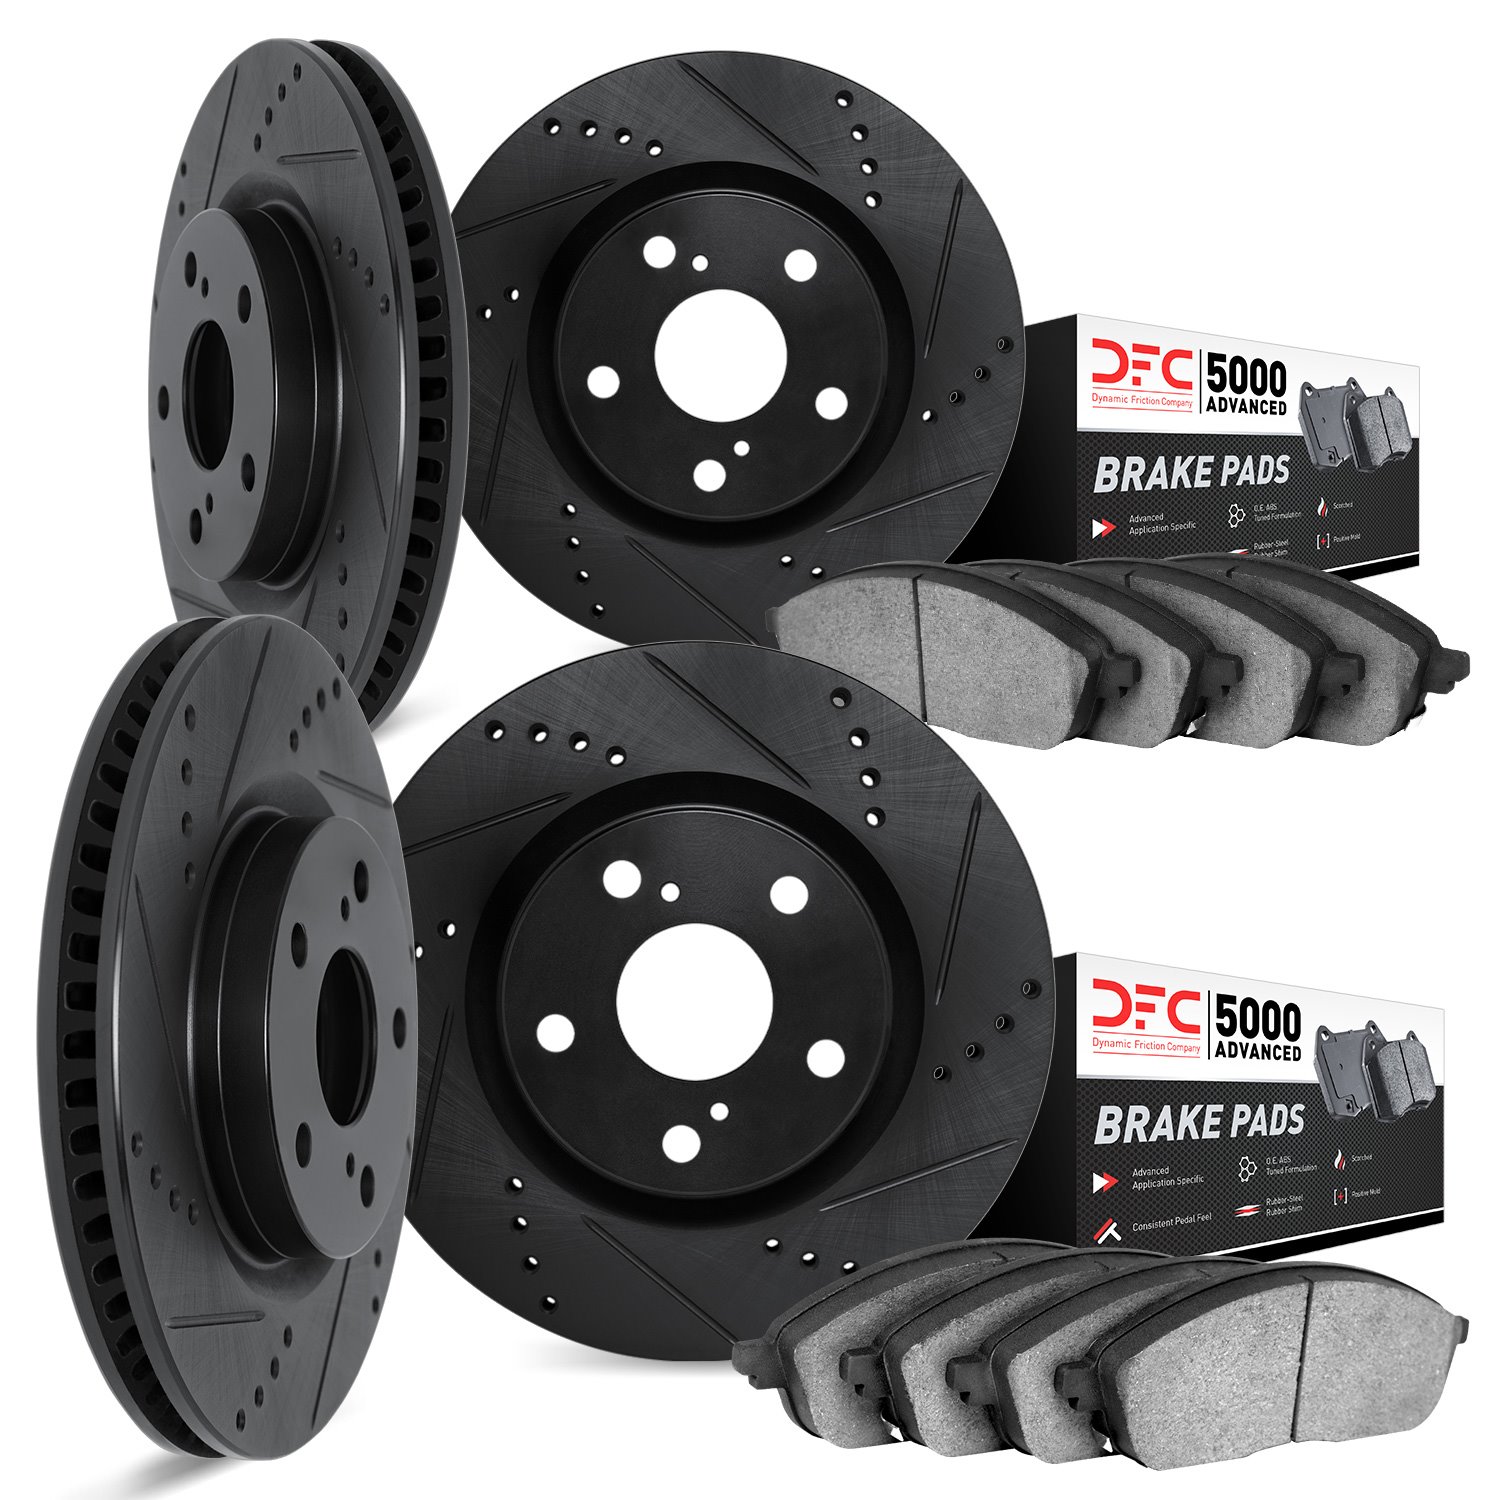 8504-67116 Drilled/Slotted Brake Rotors w/5000 Advanced Brake Pads Kit [Black], Fits Select Infiniti/Nissan, Position: Front and